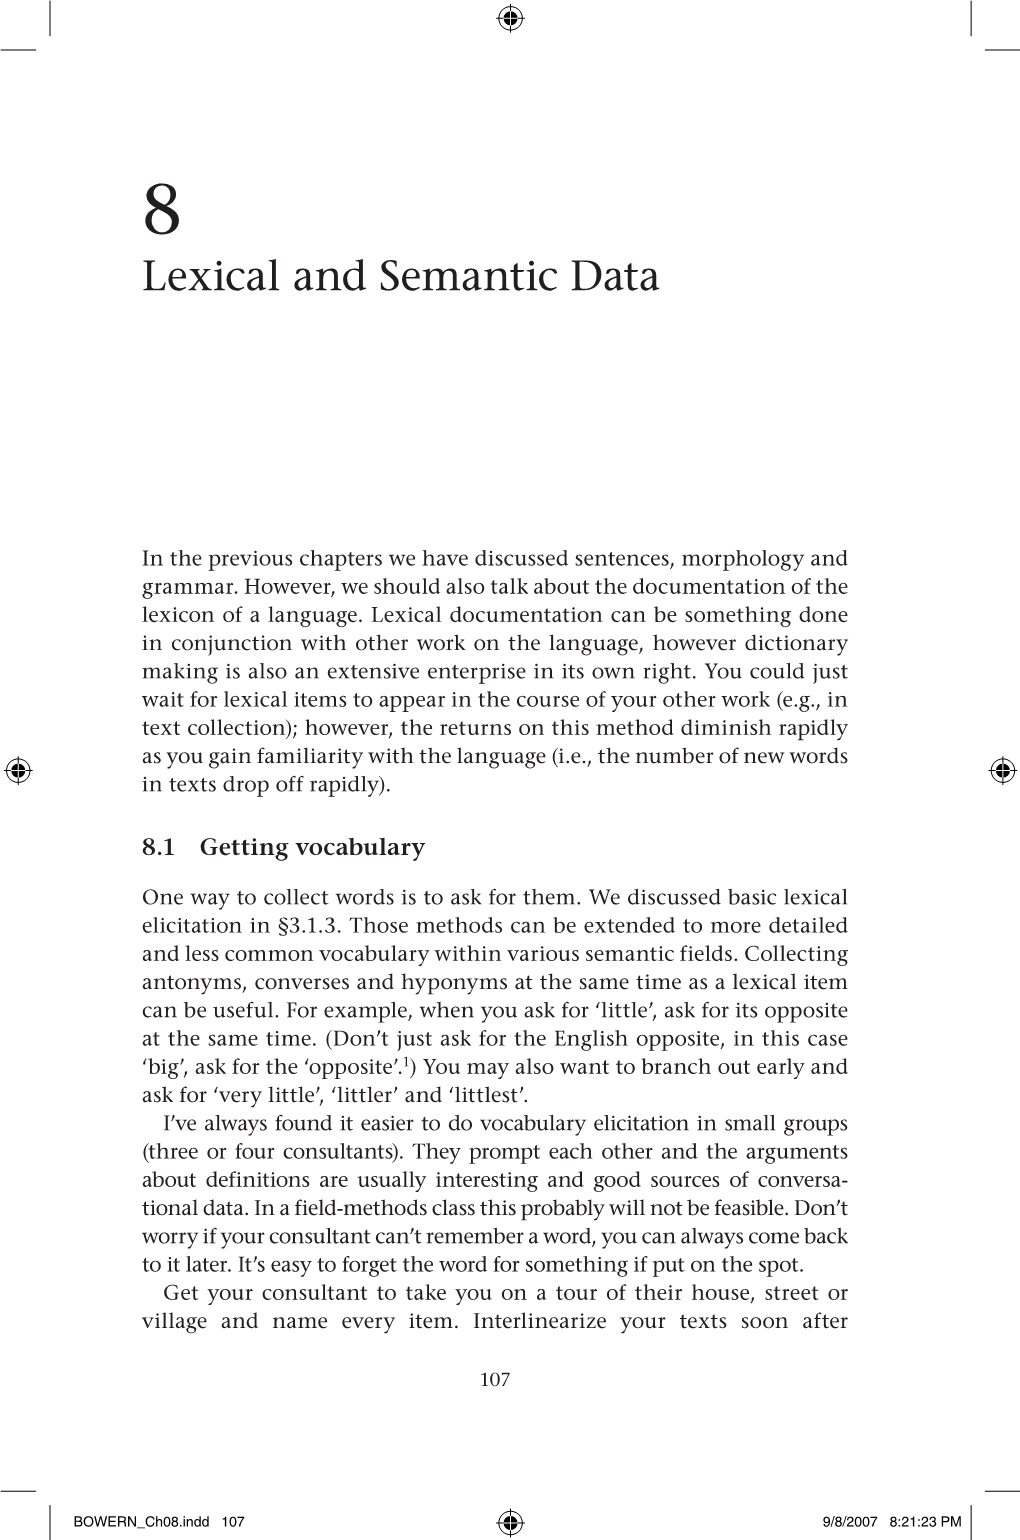 Lexical and Semantic Data